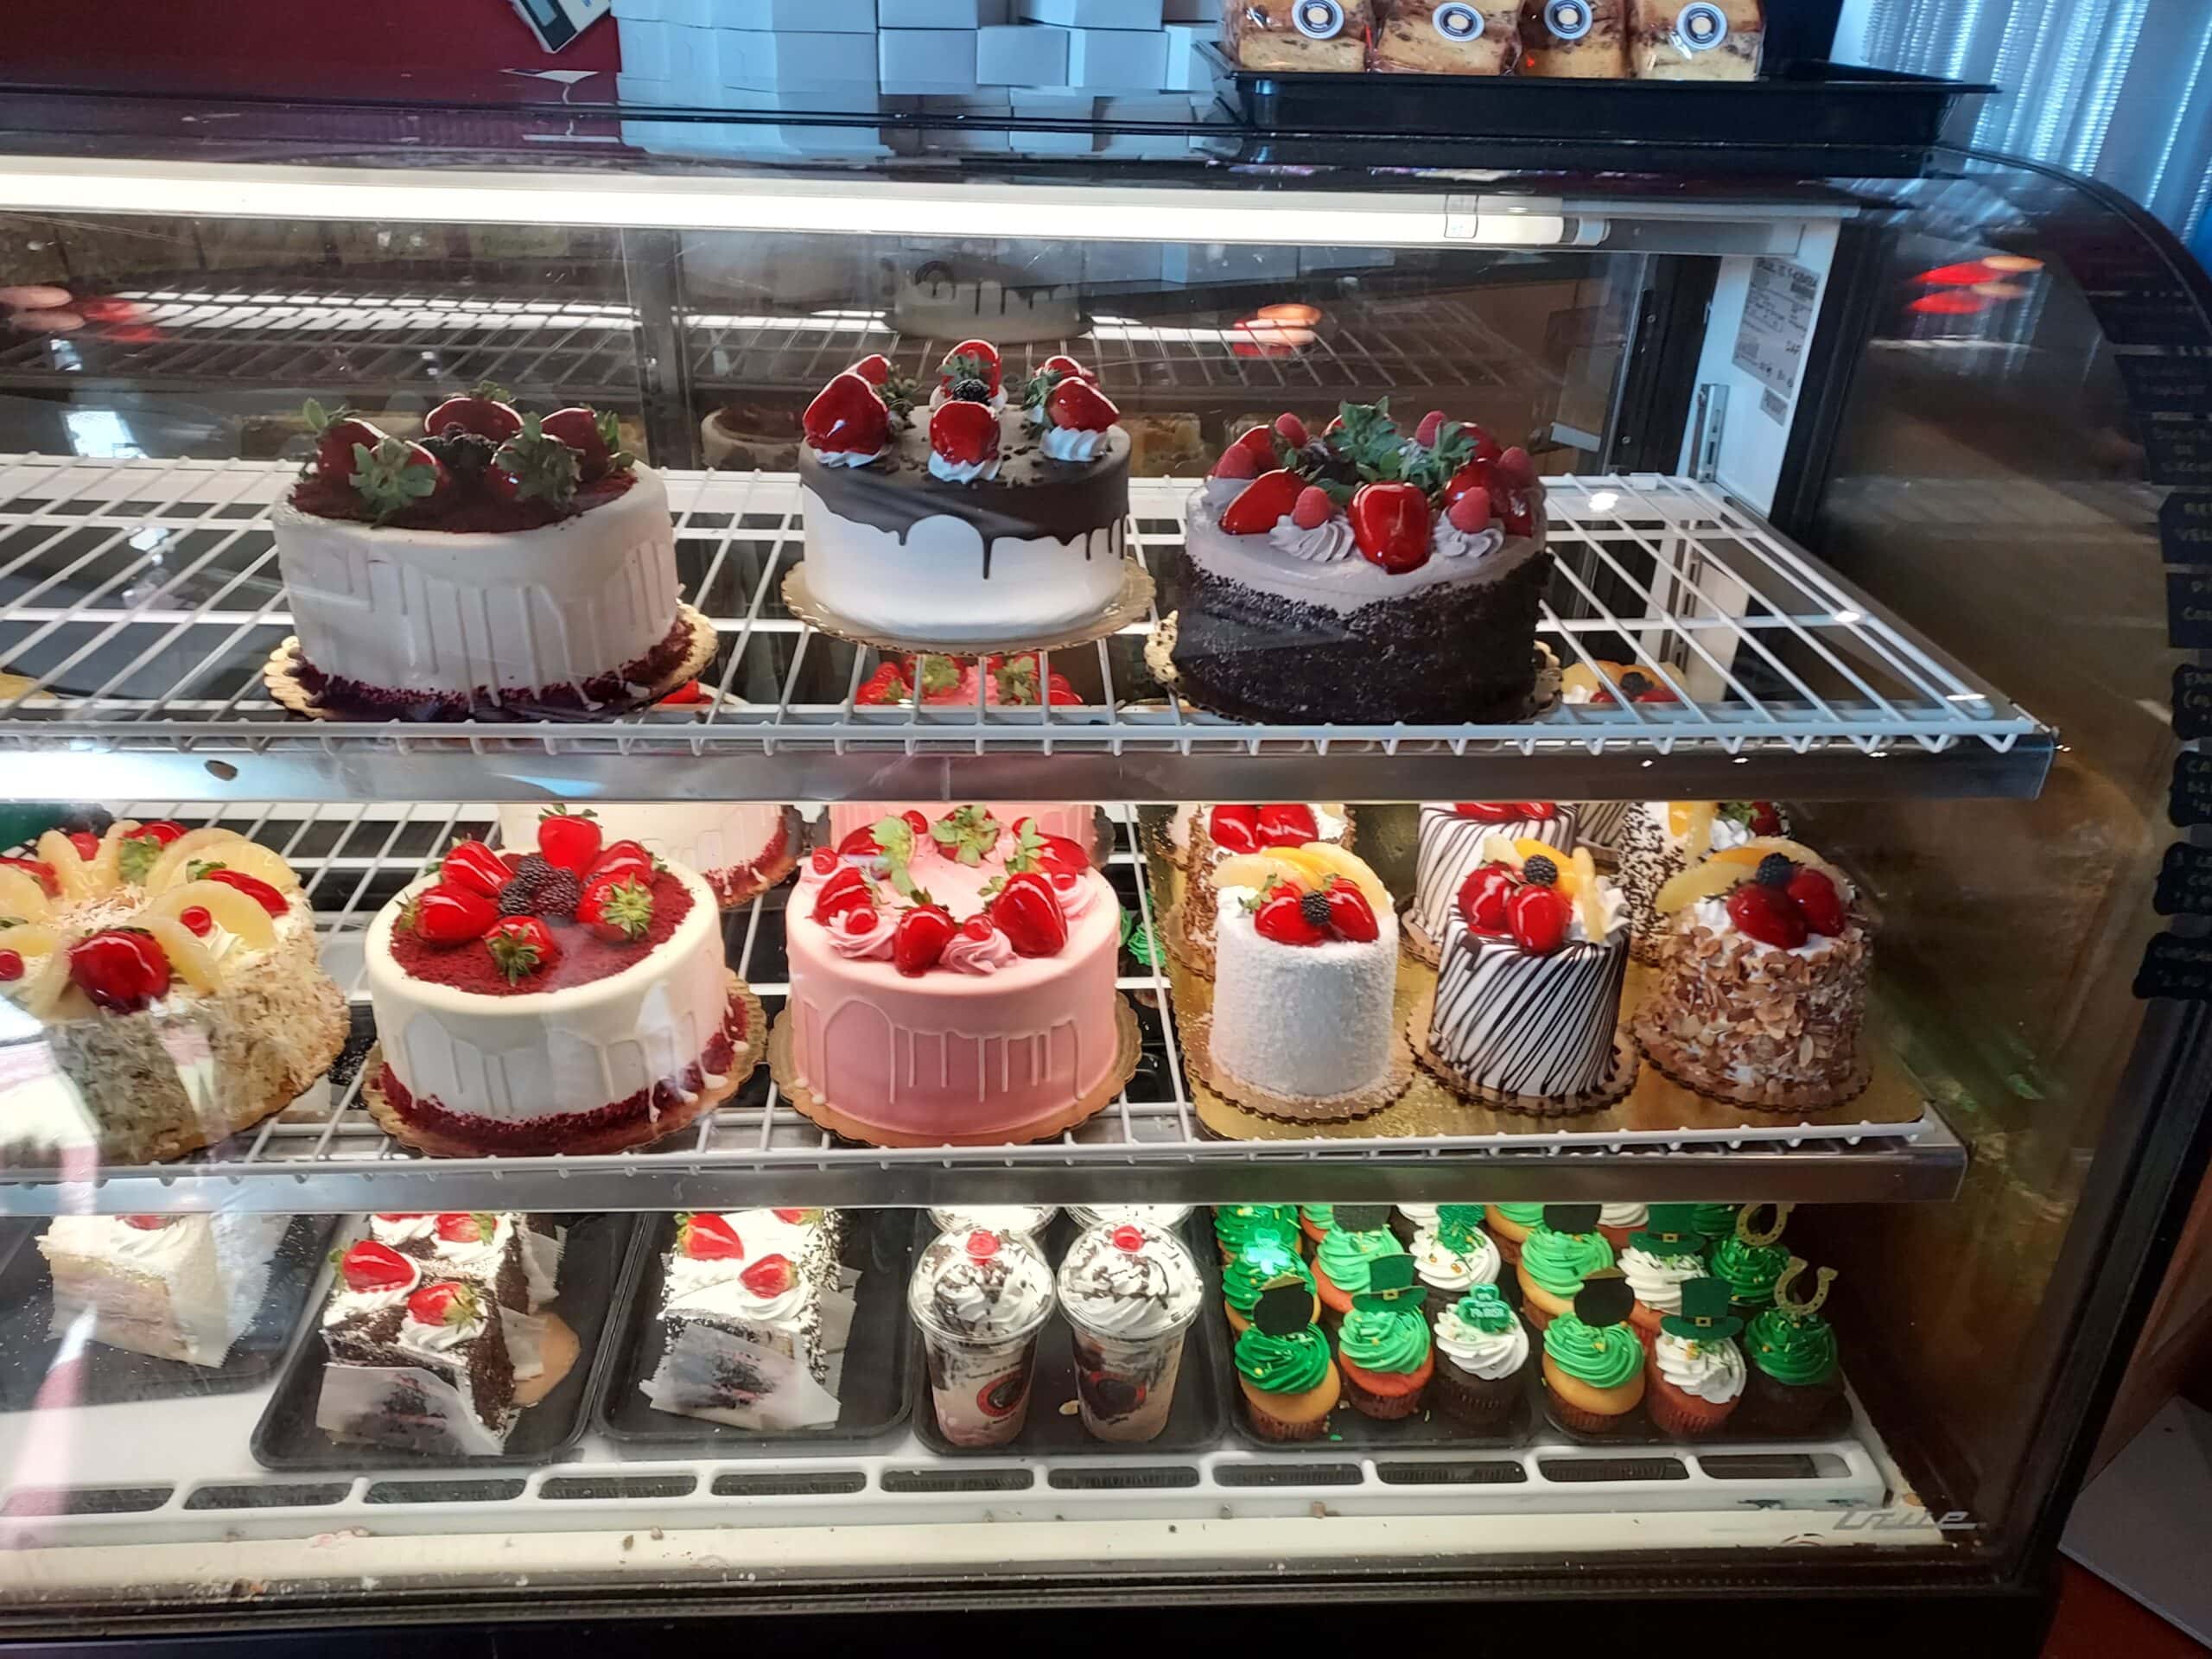 Beautifully decorated cakes and pastries at Argentina Bakery